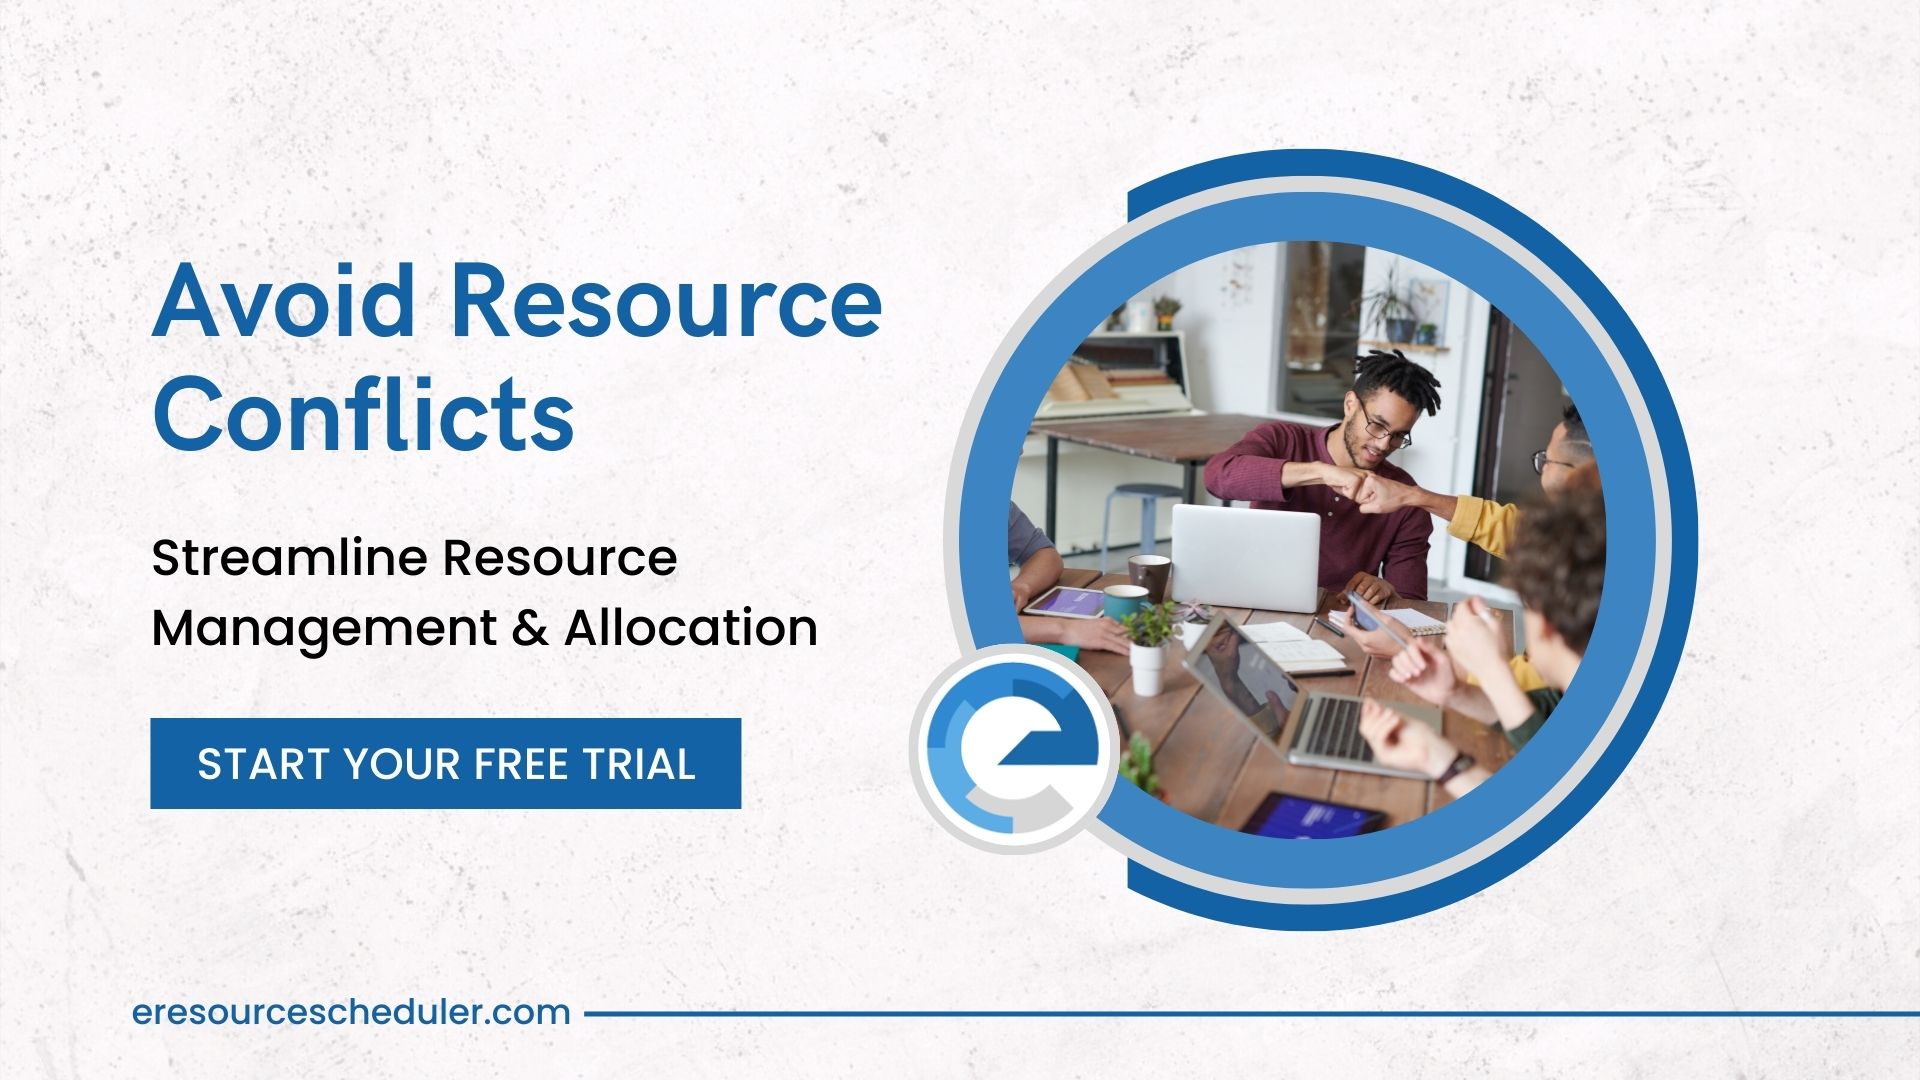 Streamline resource management and allocation